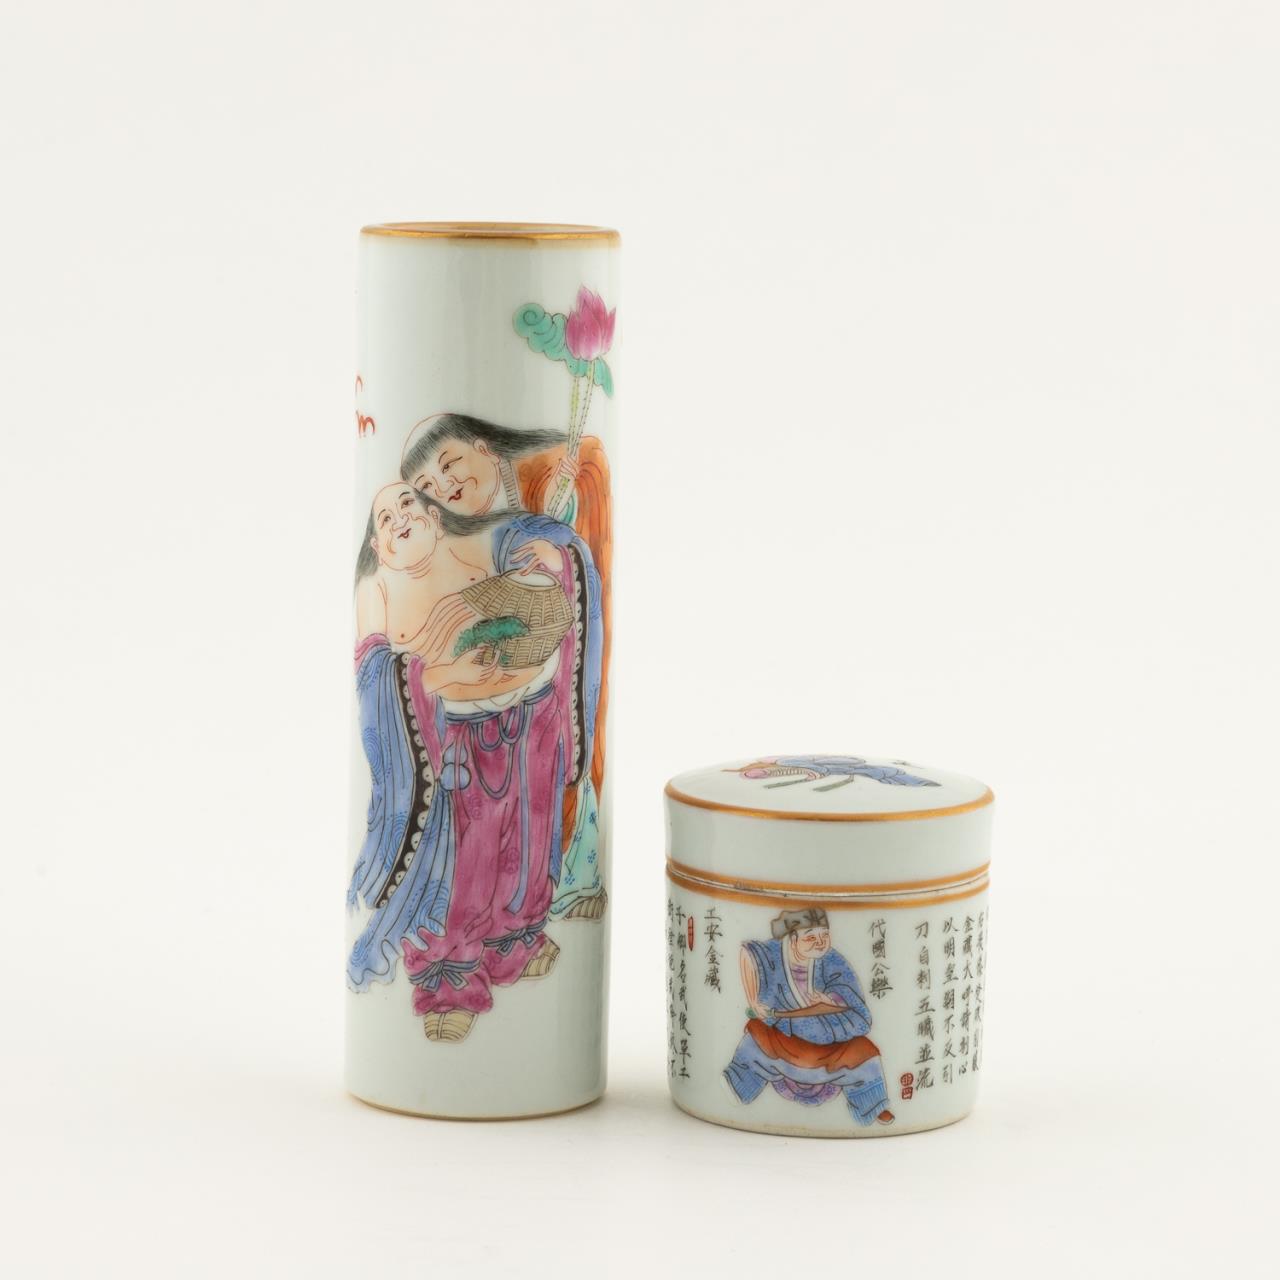 2 CHINESE SMALL FAMILLE ROSE PORCELAIN